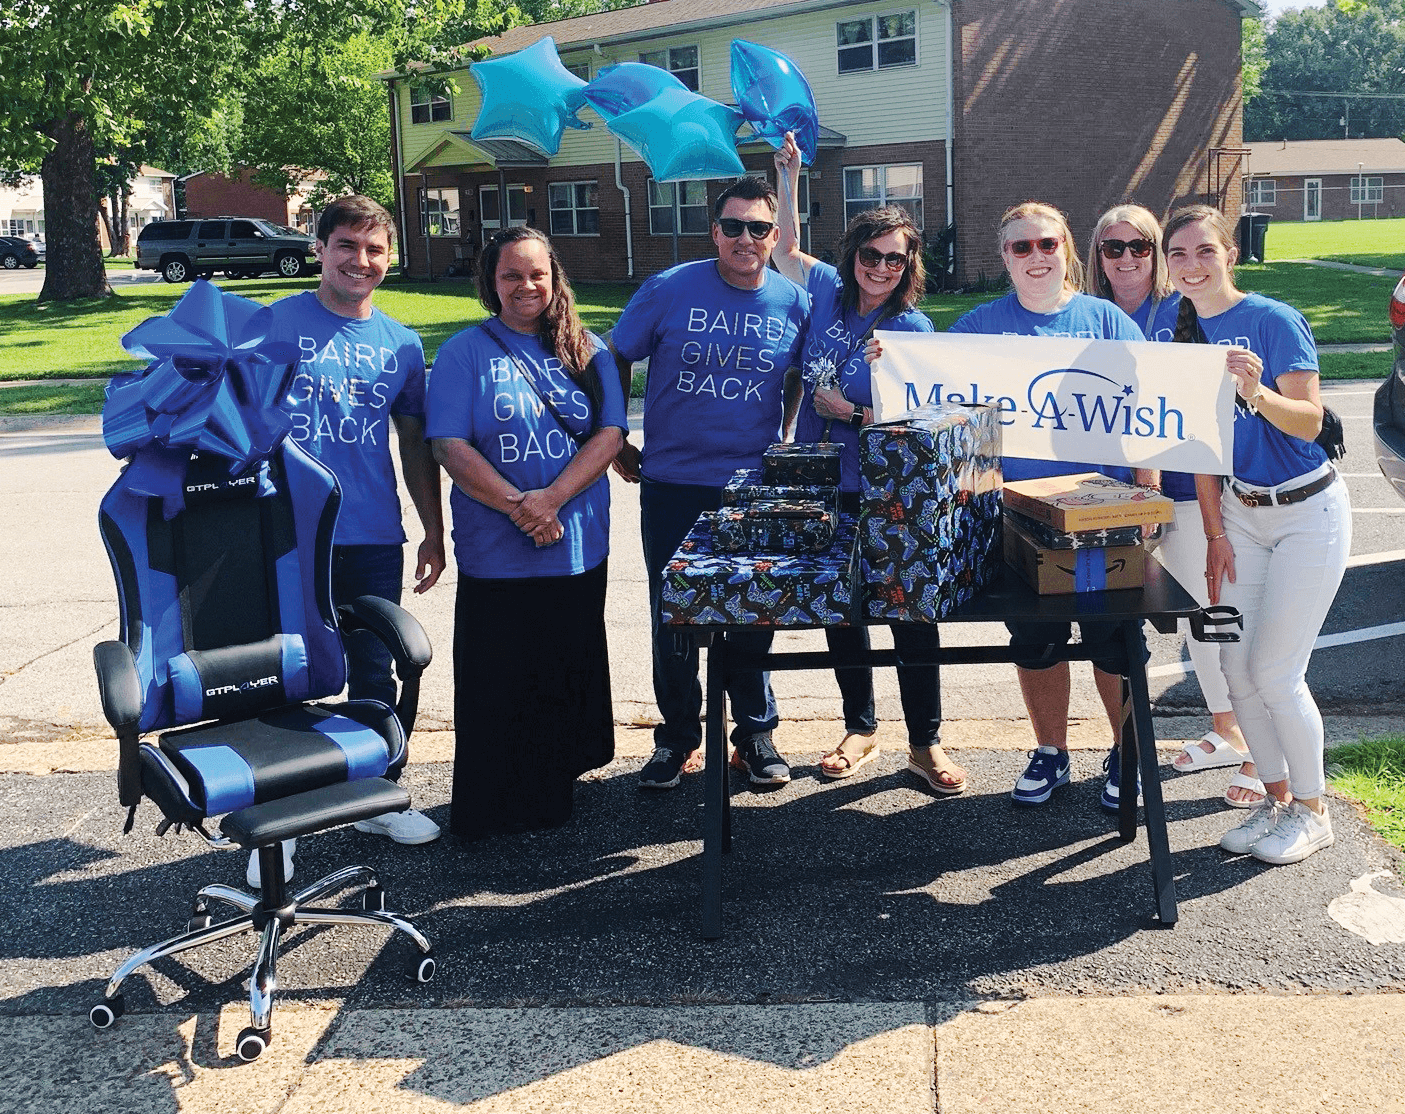 A group of Baird associates stand with a gaming chair, giftwrapped presents, and a sign for the Make a Wish foundation